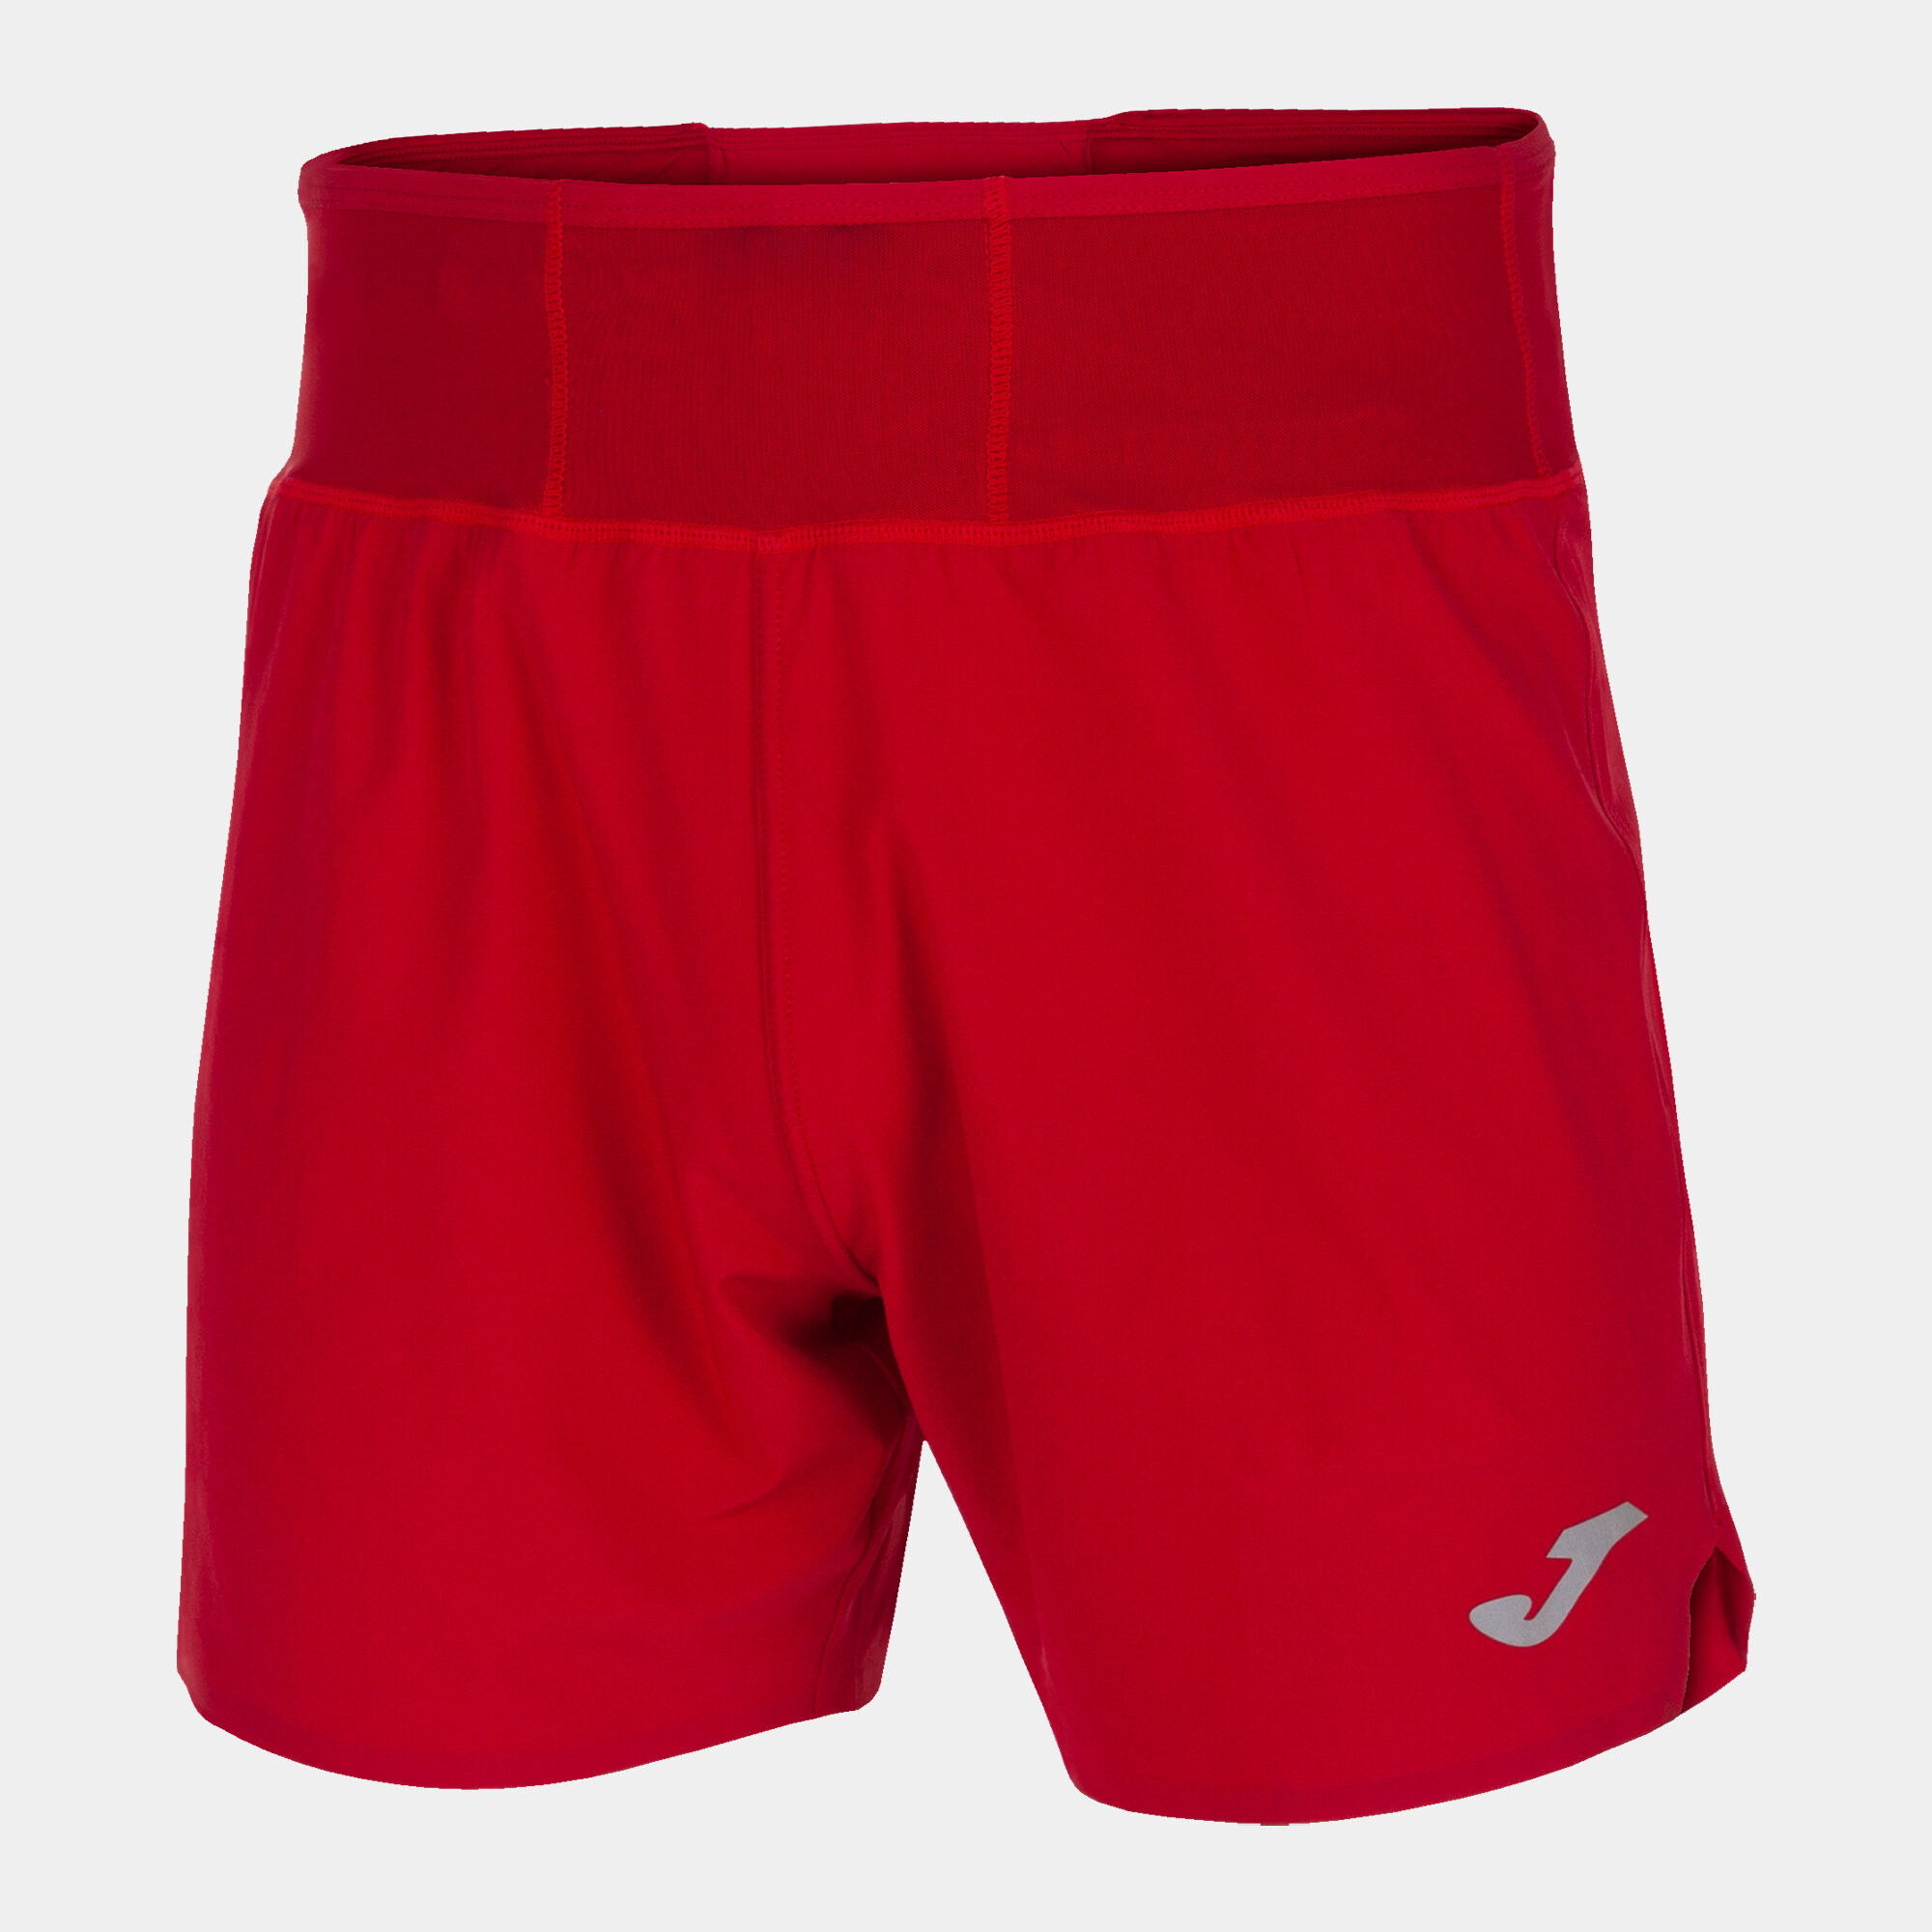 Shorts man R-Combi red